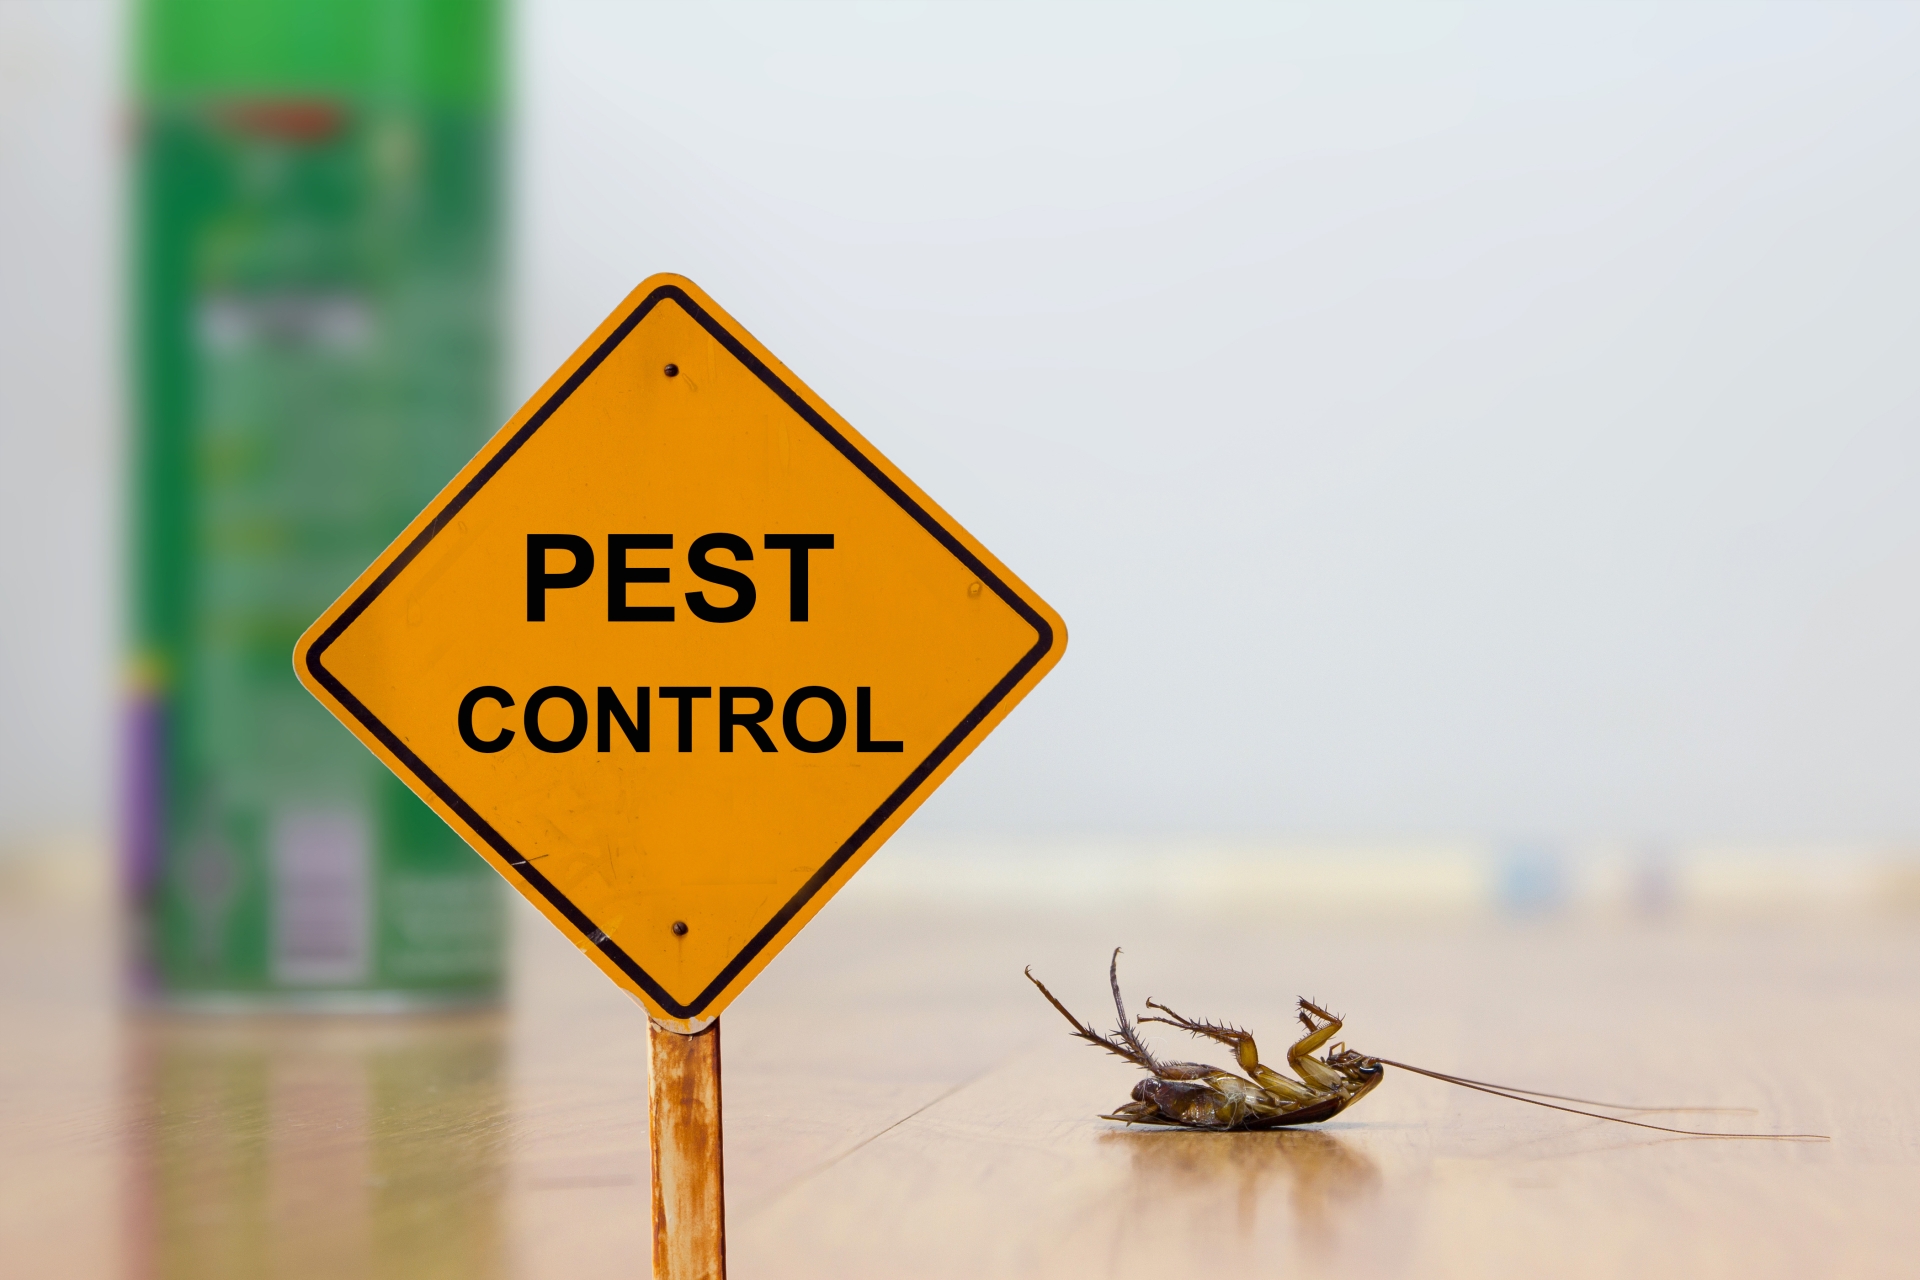 24 Hour Pest Control, Pest Control in Barking, Creekmouth, IG11. Call Now 020 8166 9746